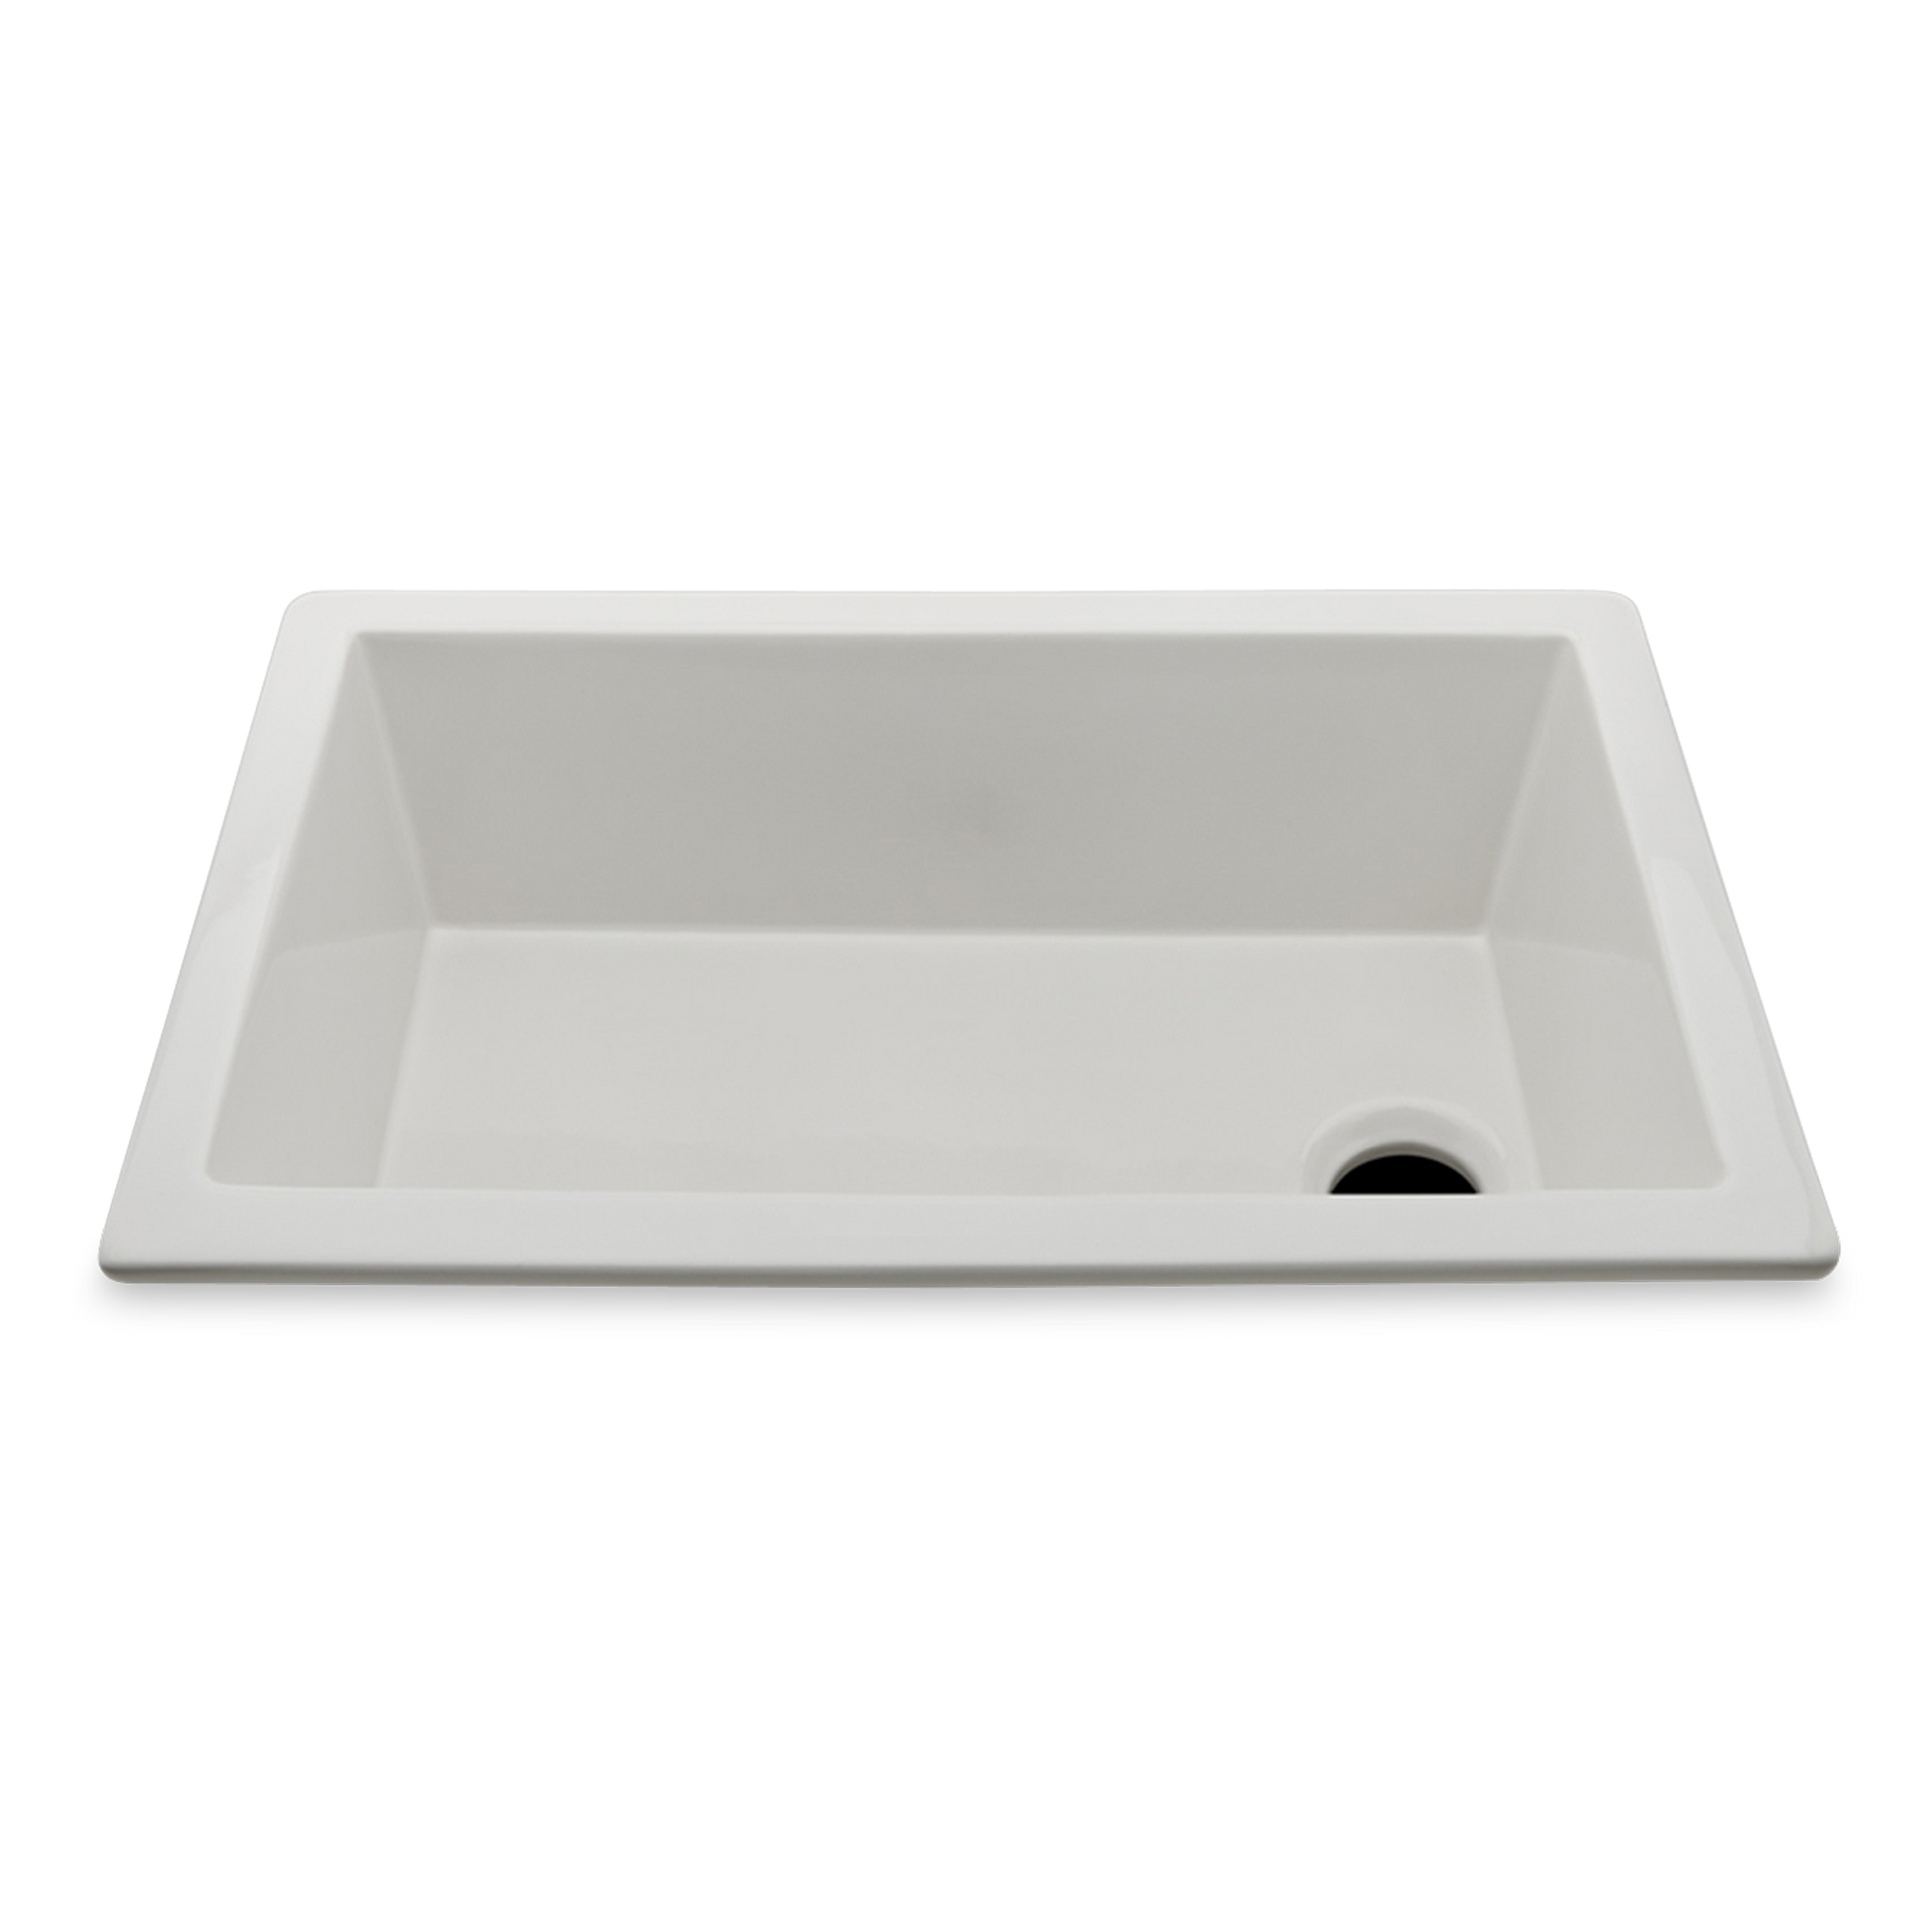 At home in a restored farmhouse or modern beach cottage, this traditional sink is updated to be practical and utilitarian.